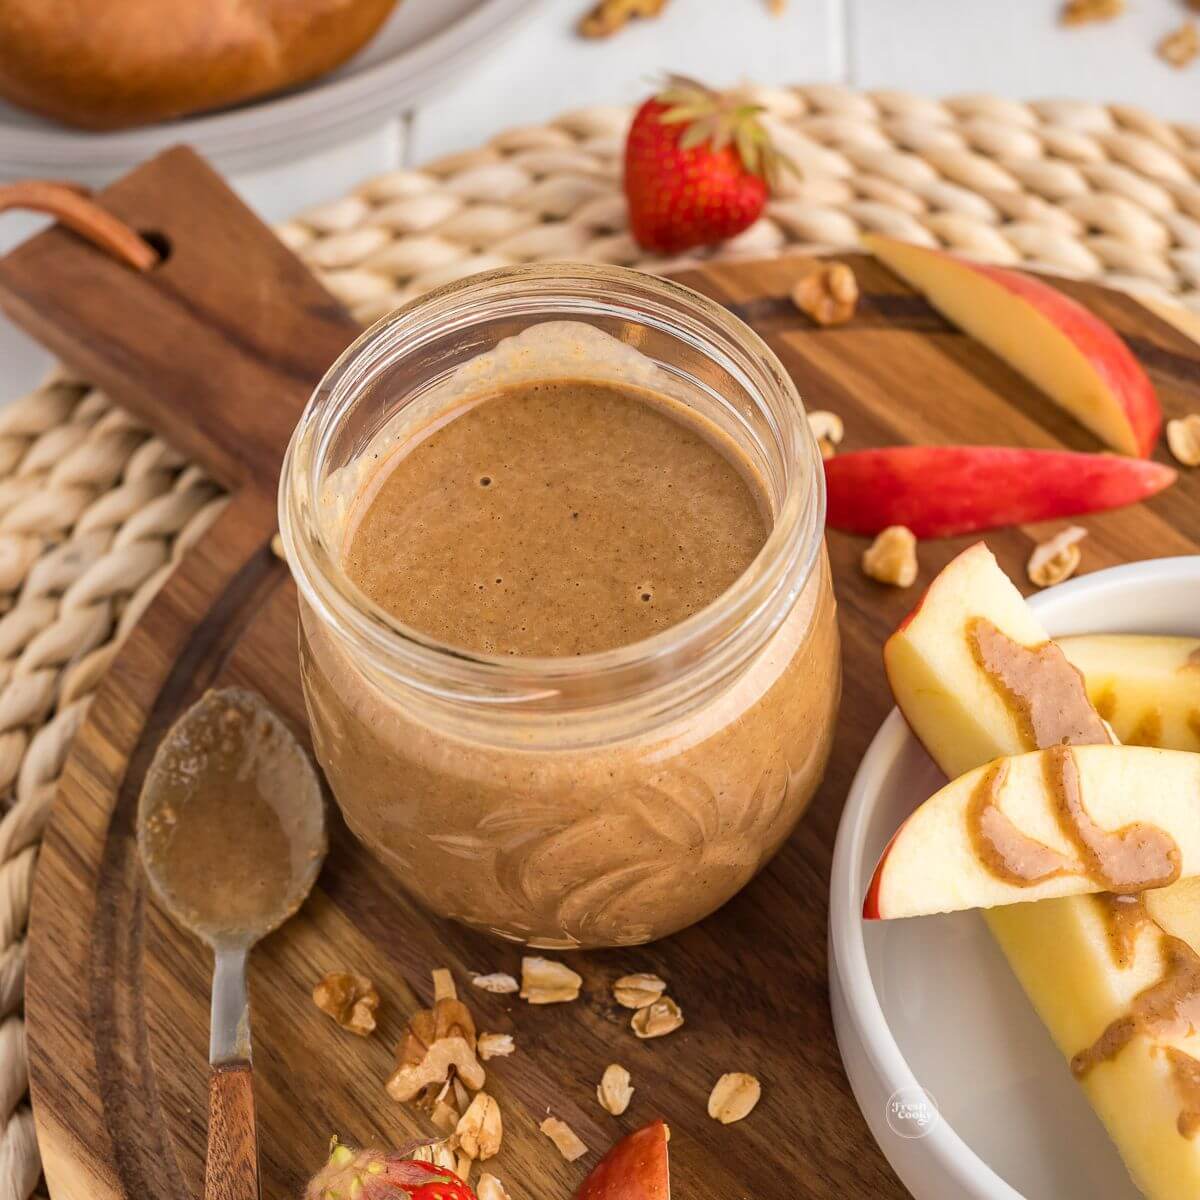 Granola butter in jar with apples and strawberries.